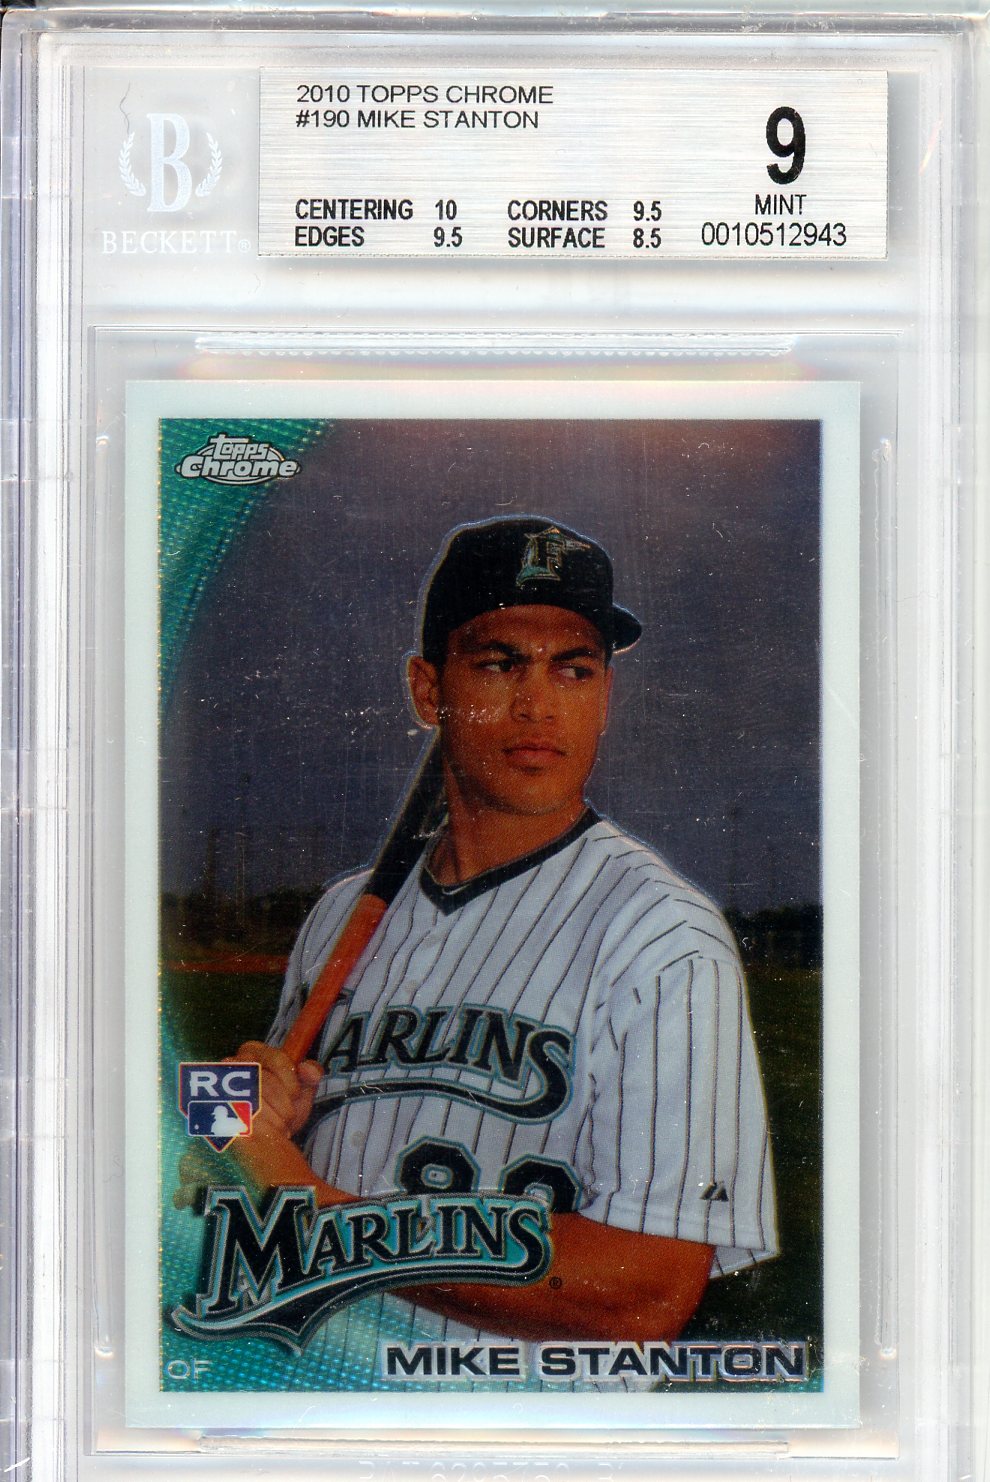 2010 Topps Chrome #190 Mike Stanton Rookie Card BGS 9